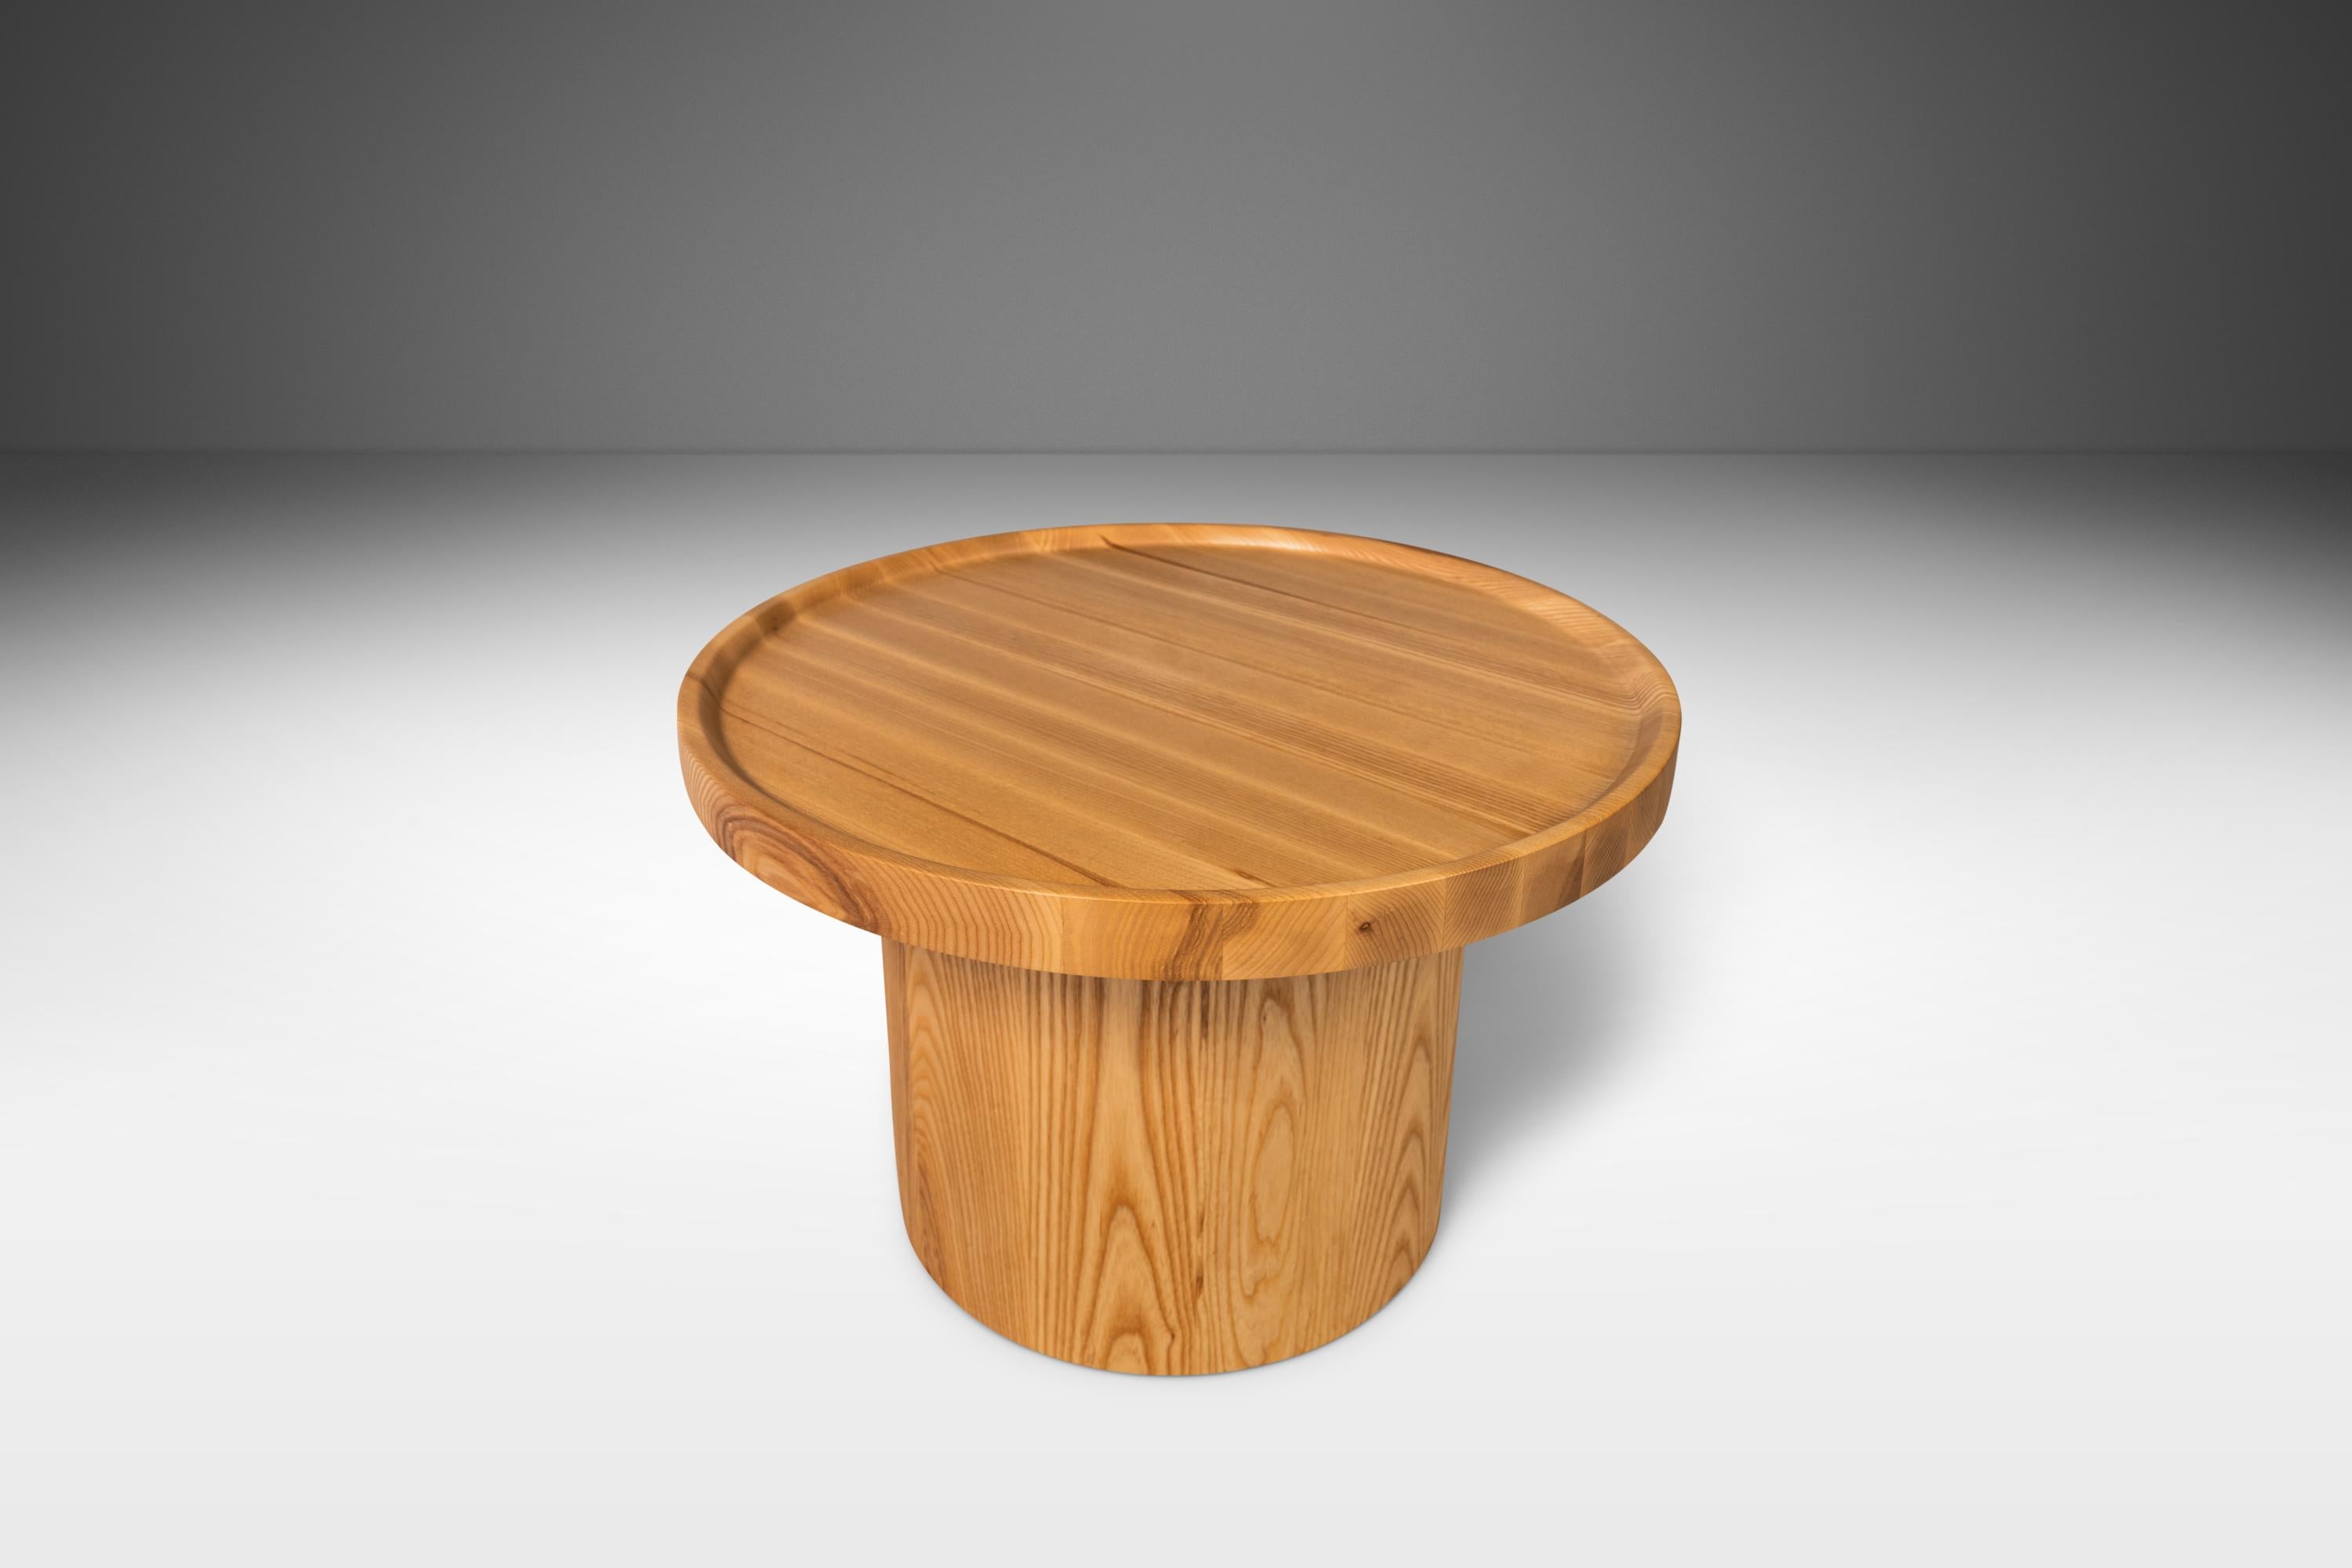 Combining natural materials with classic clean lines, rounded shapes, and smooth surfaces this coffee table is the very definition of 'Organic Modern'. Handcrafted from sustainably-sourced solid ash, which features extraordinary old-growth